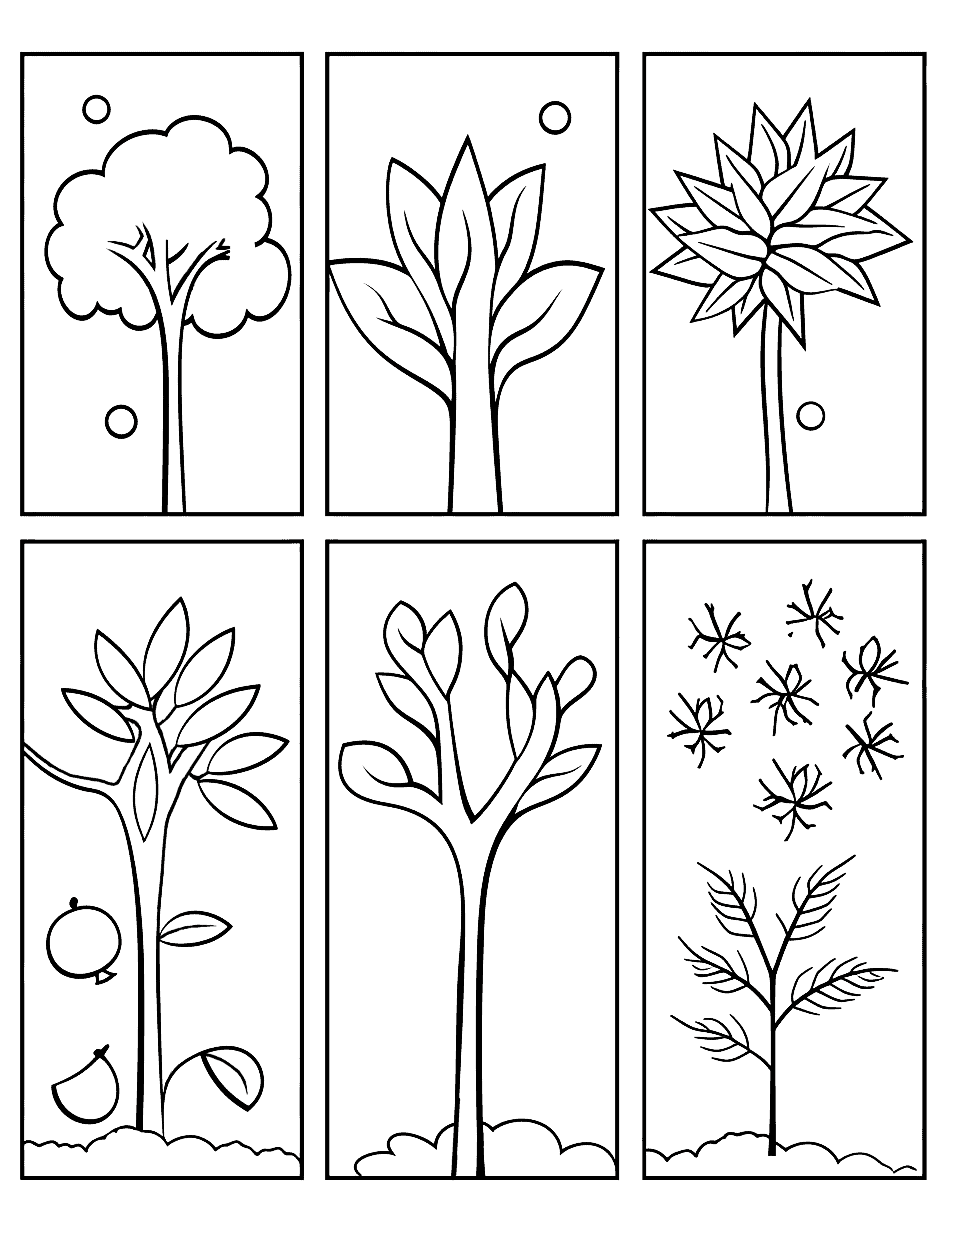 Four Seasons Fall Coloring Page - A coloring page showcasing spring, summer, fall, and winter, highlighting the changes nature goes through each year.